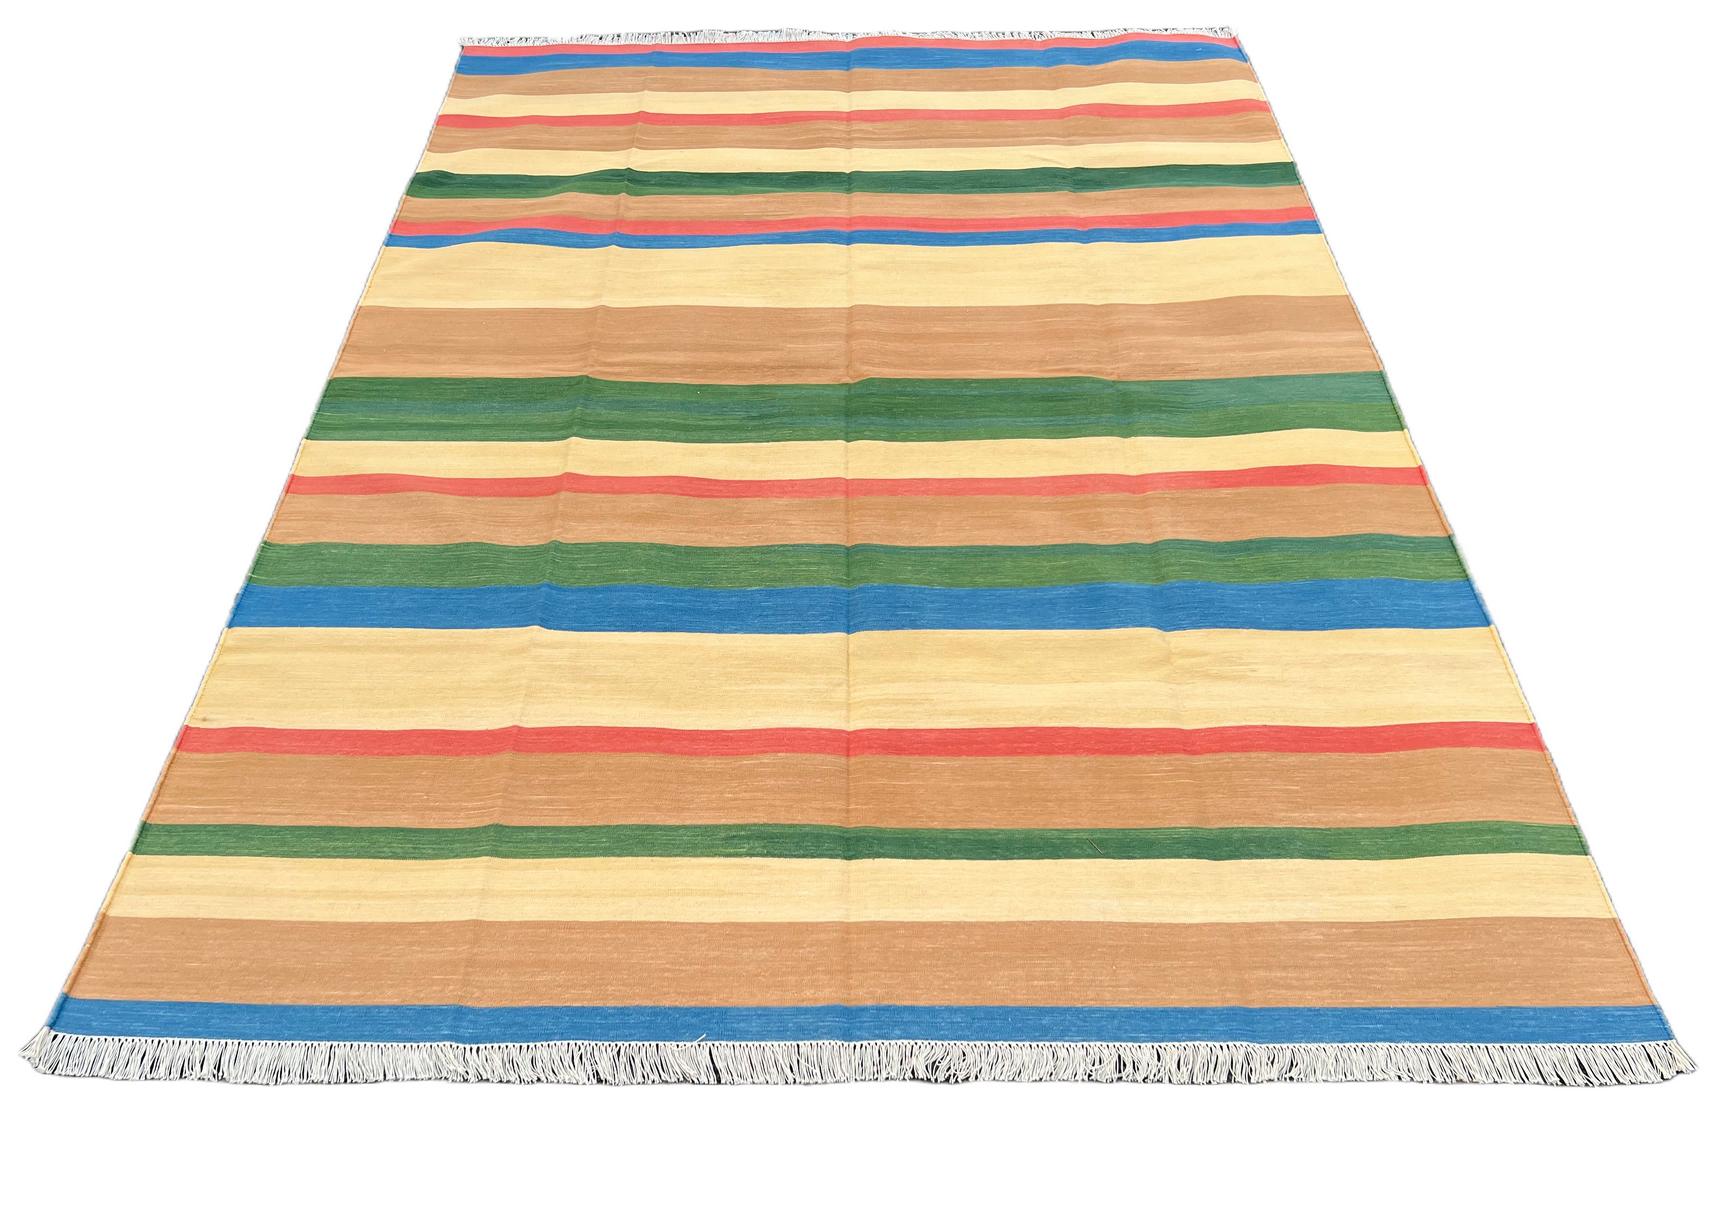 Hand-Woven Handmade Cotton Area Flat Weave Rug, 6x9 Tan, Blue And Green Striped Dhurrie Rug For Sale